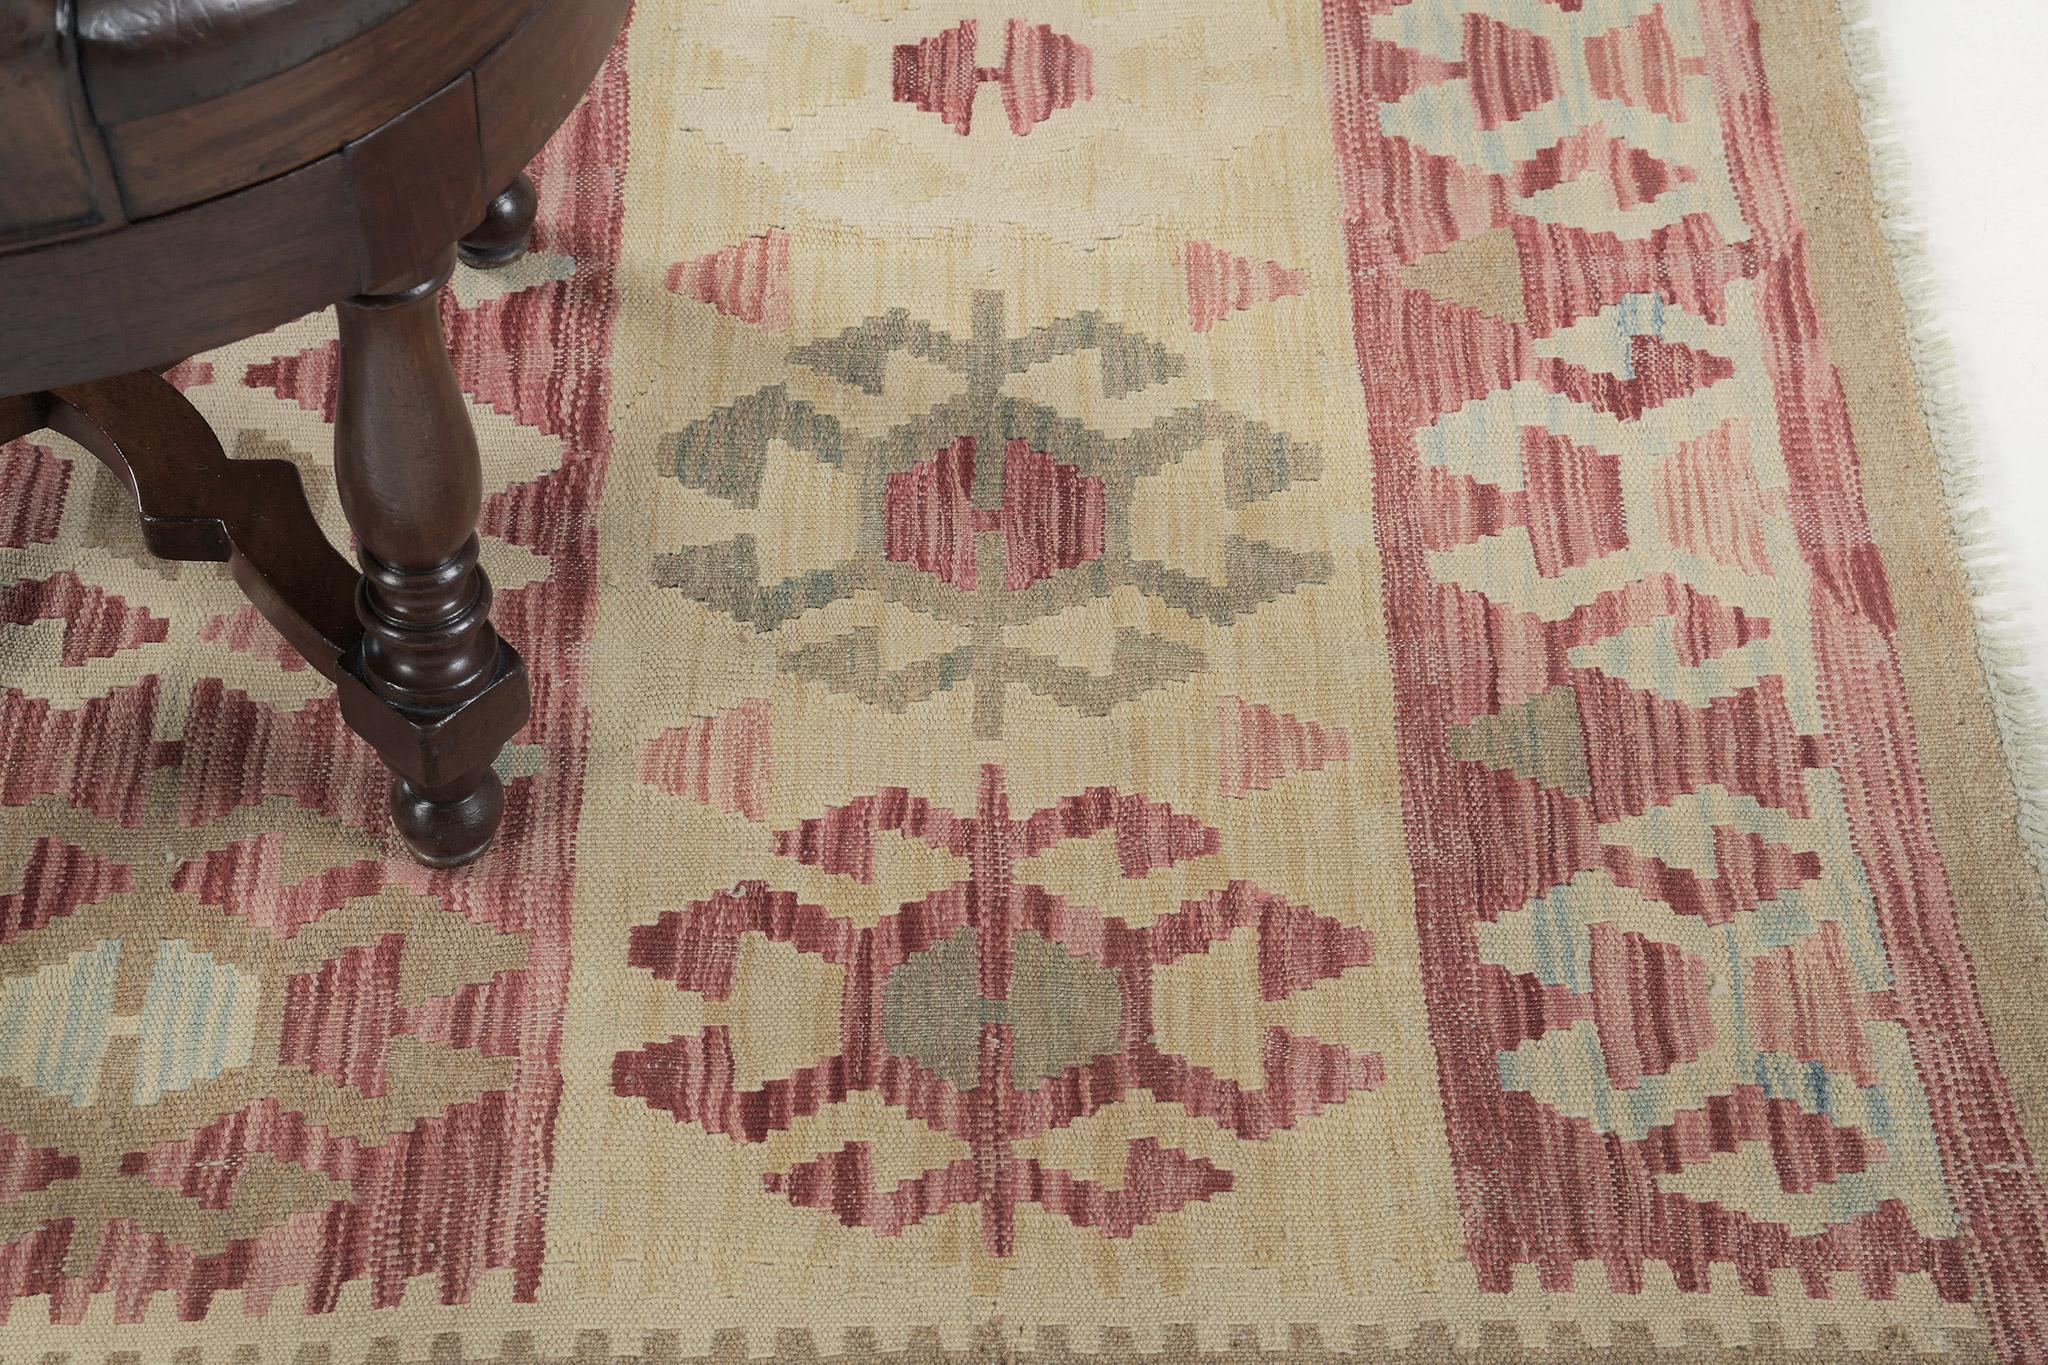 Scorpion patterns are featured in this stunning masterpiece. Yellow, red, light brown, and some variegated tones of blue and white, are perfectly woven in this Kilim. 

Rug Number
24942
Size
4' 1